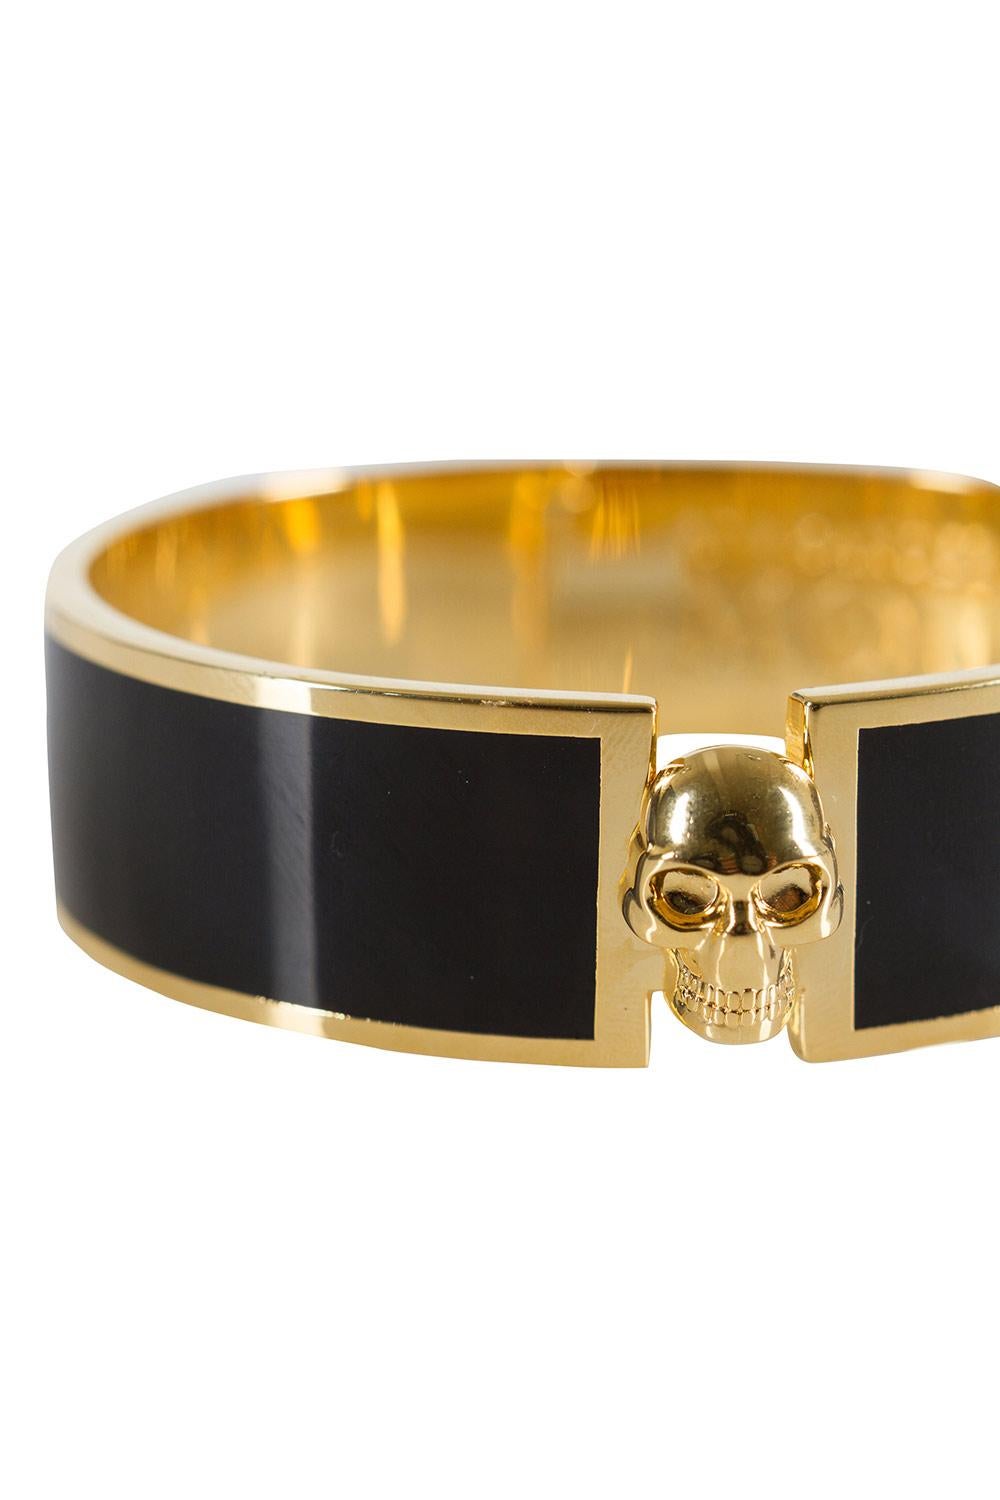 Alexander McQueen's penchant for using skull motifs is seen not only in clothes and shoes but also in their line of accessories. Carrying the very signature is this bracelet sculpted from gold-tone metal and enhanced with black resin and a skull